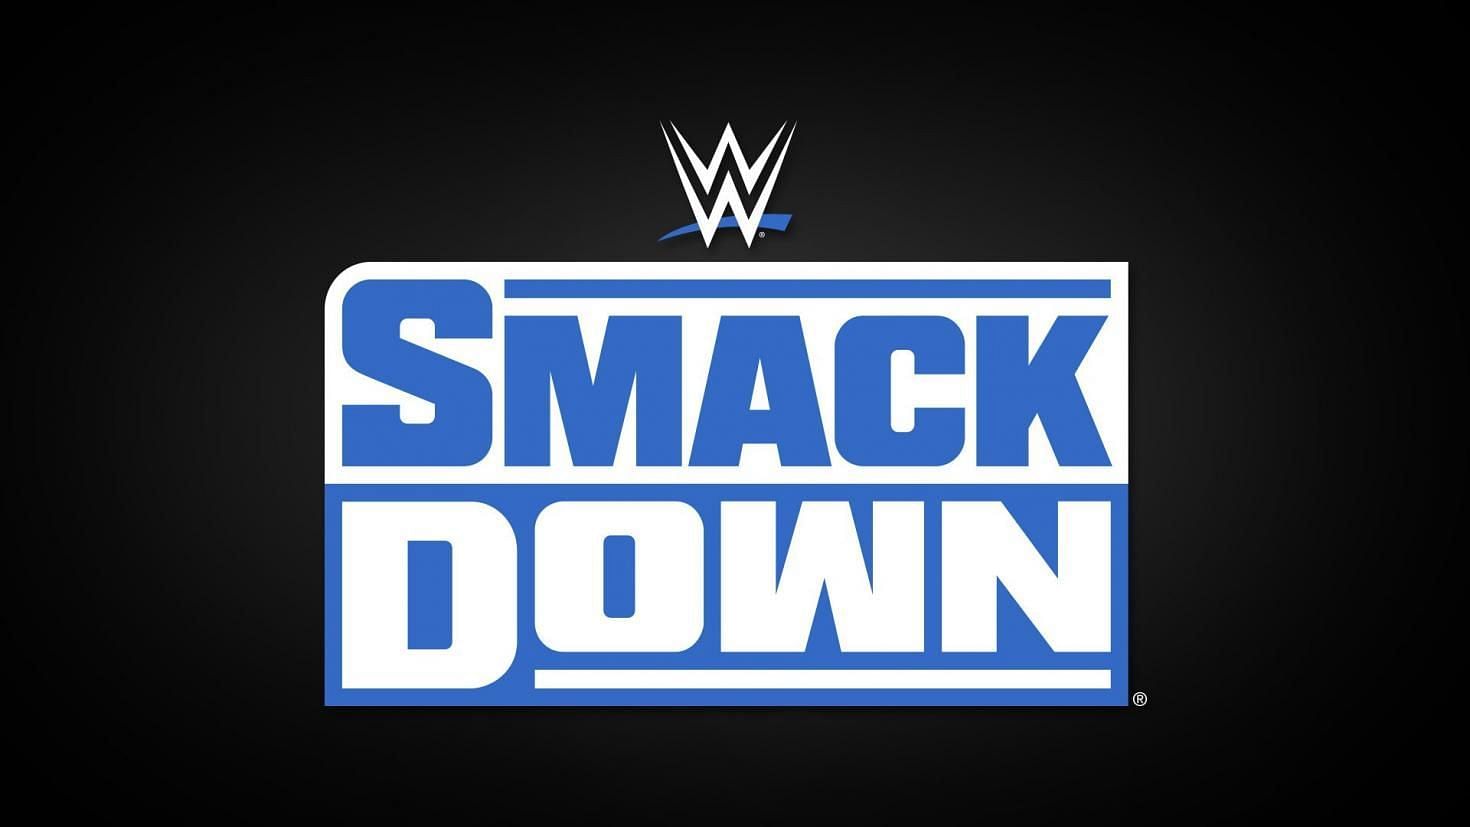 How will WWE SmackDown wrap up 2021?